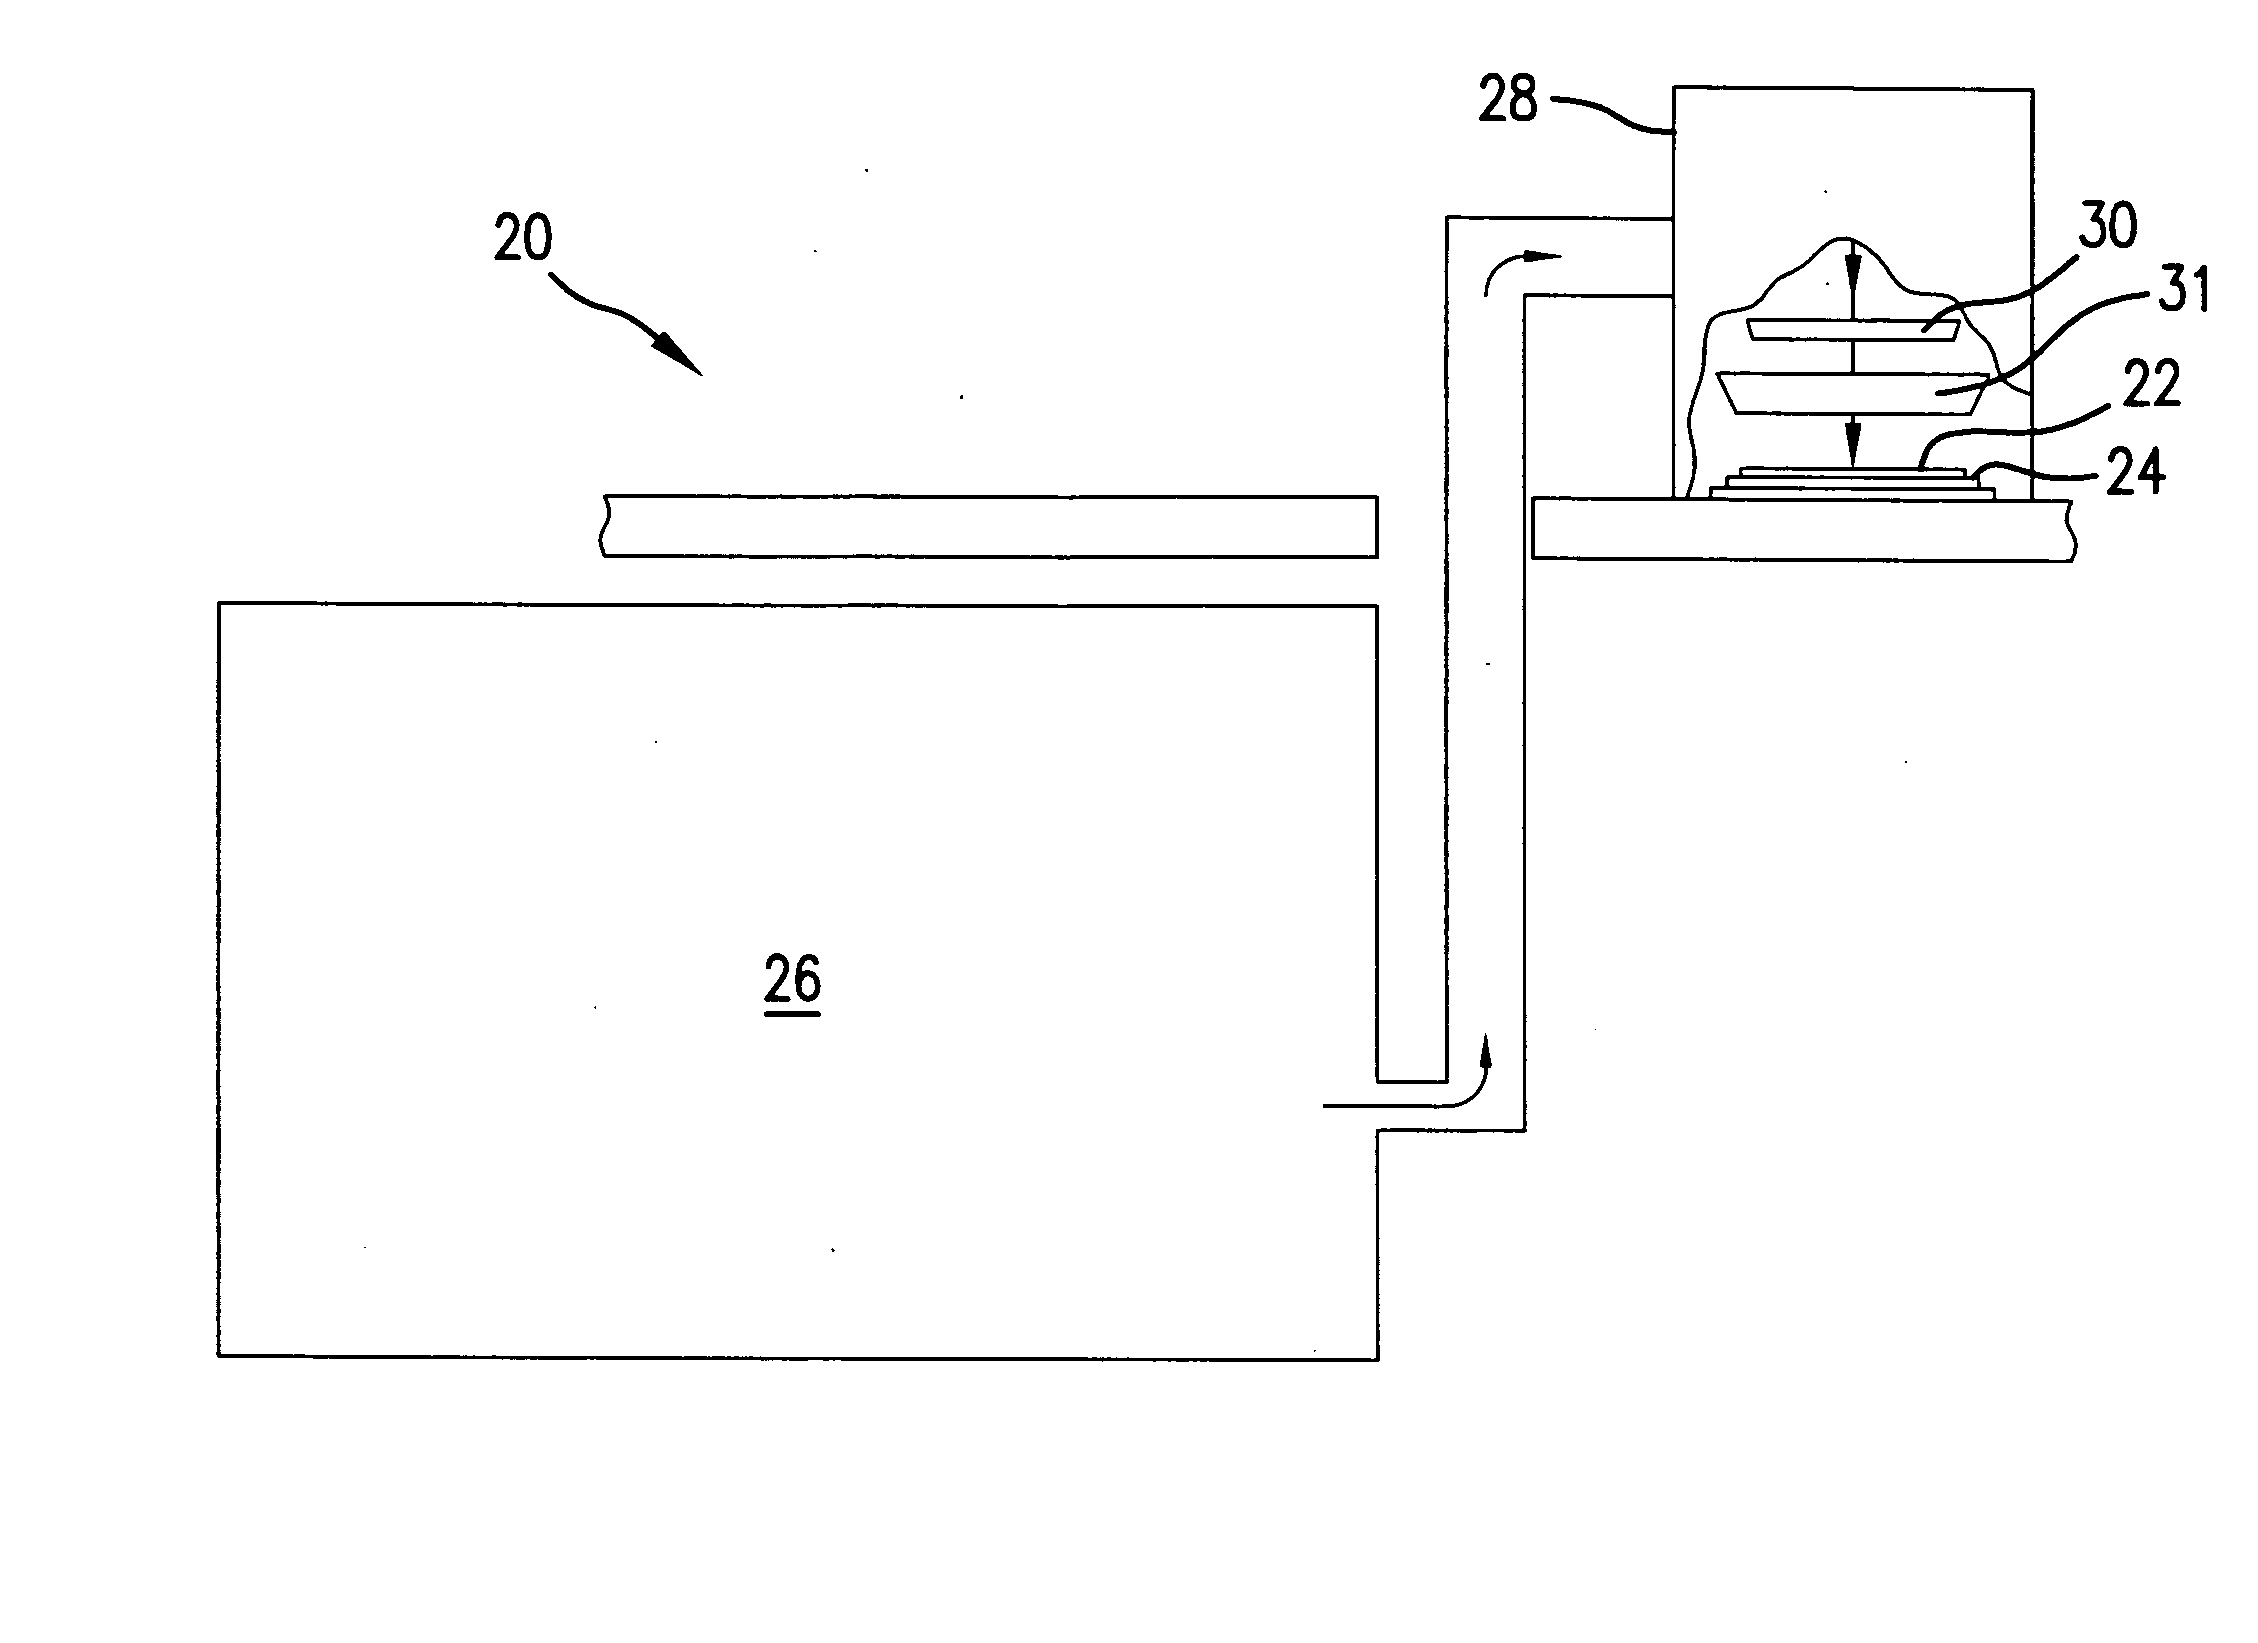 Active bandwidth control for a laser